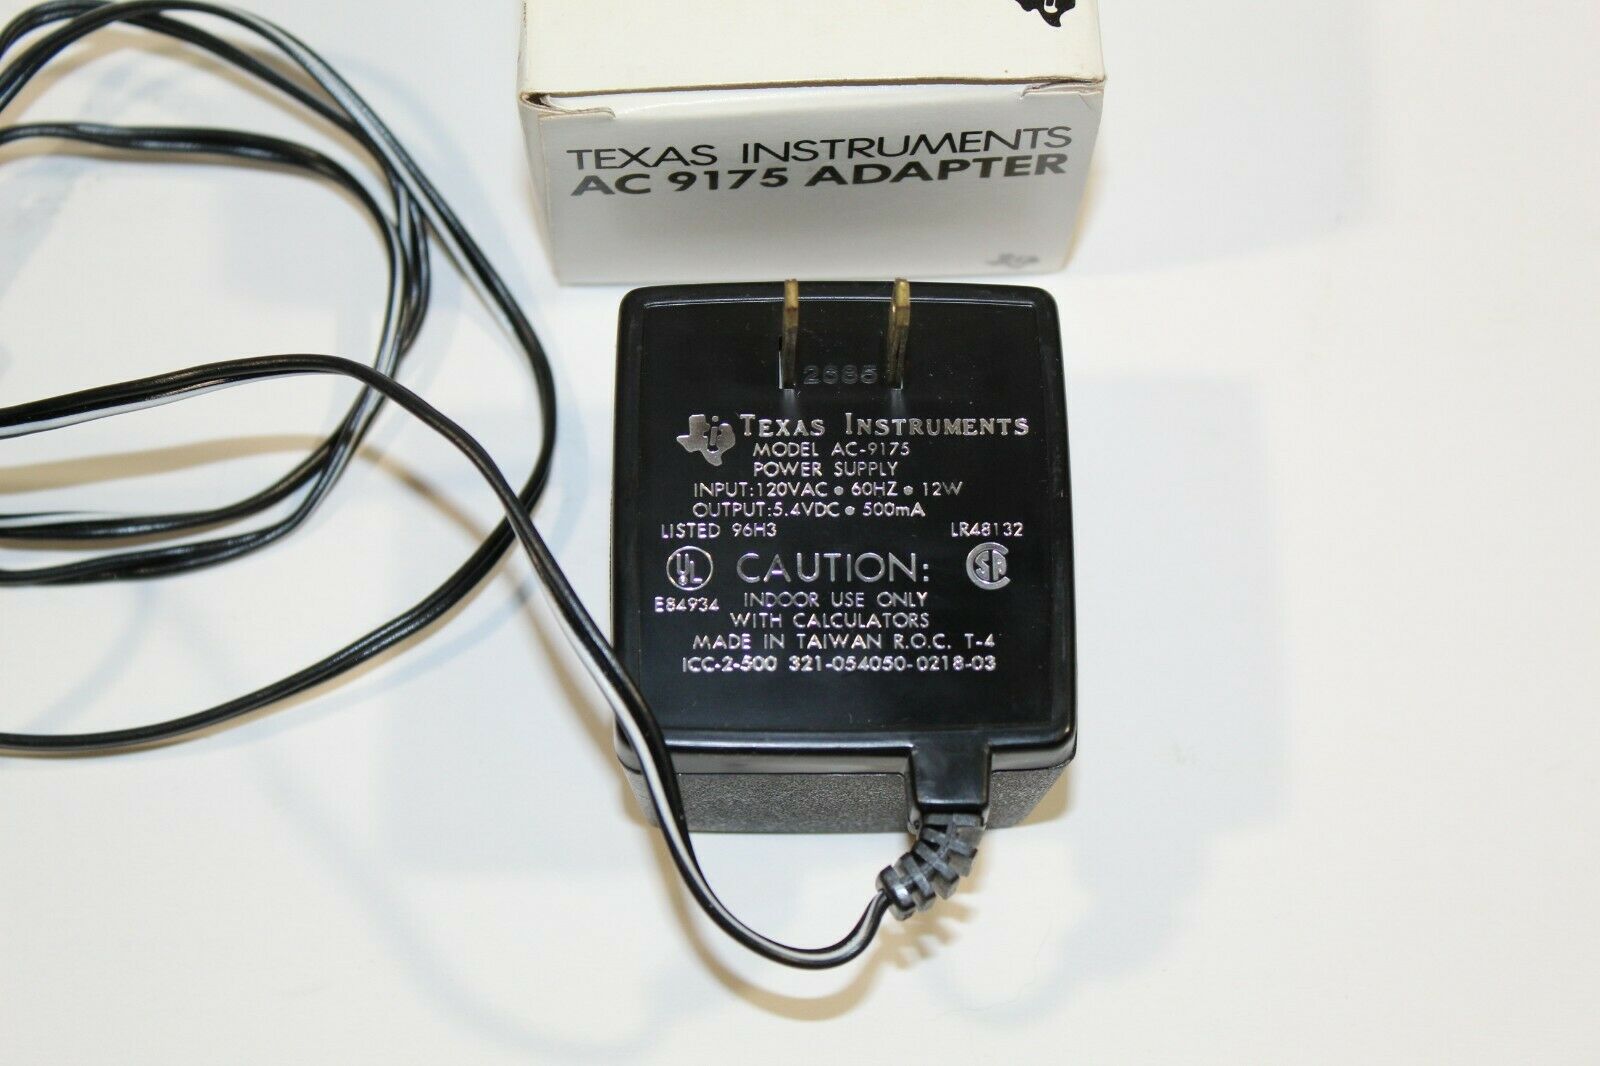 NEW TEXAS INSTRUMENTS AC-9175A AC-9175 5.4VDC 500mA AC DC WALL WART POWER SUPPLY ADAPTER CORD